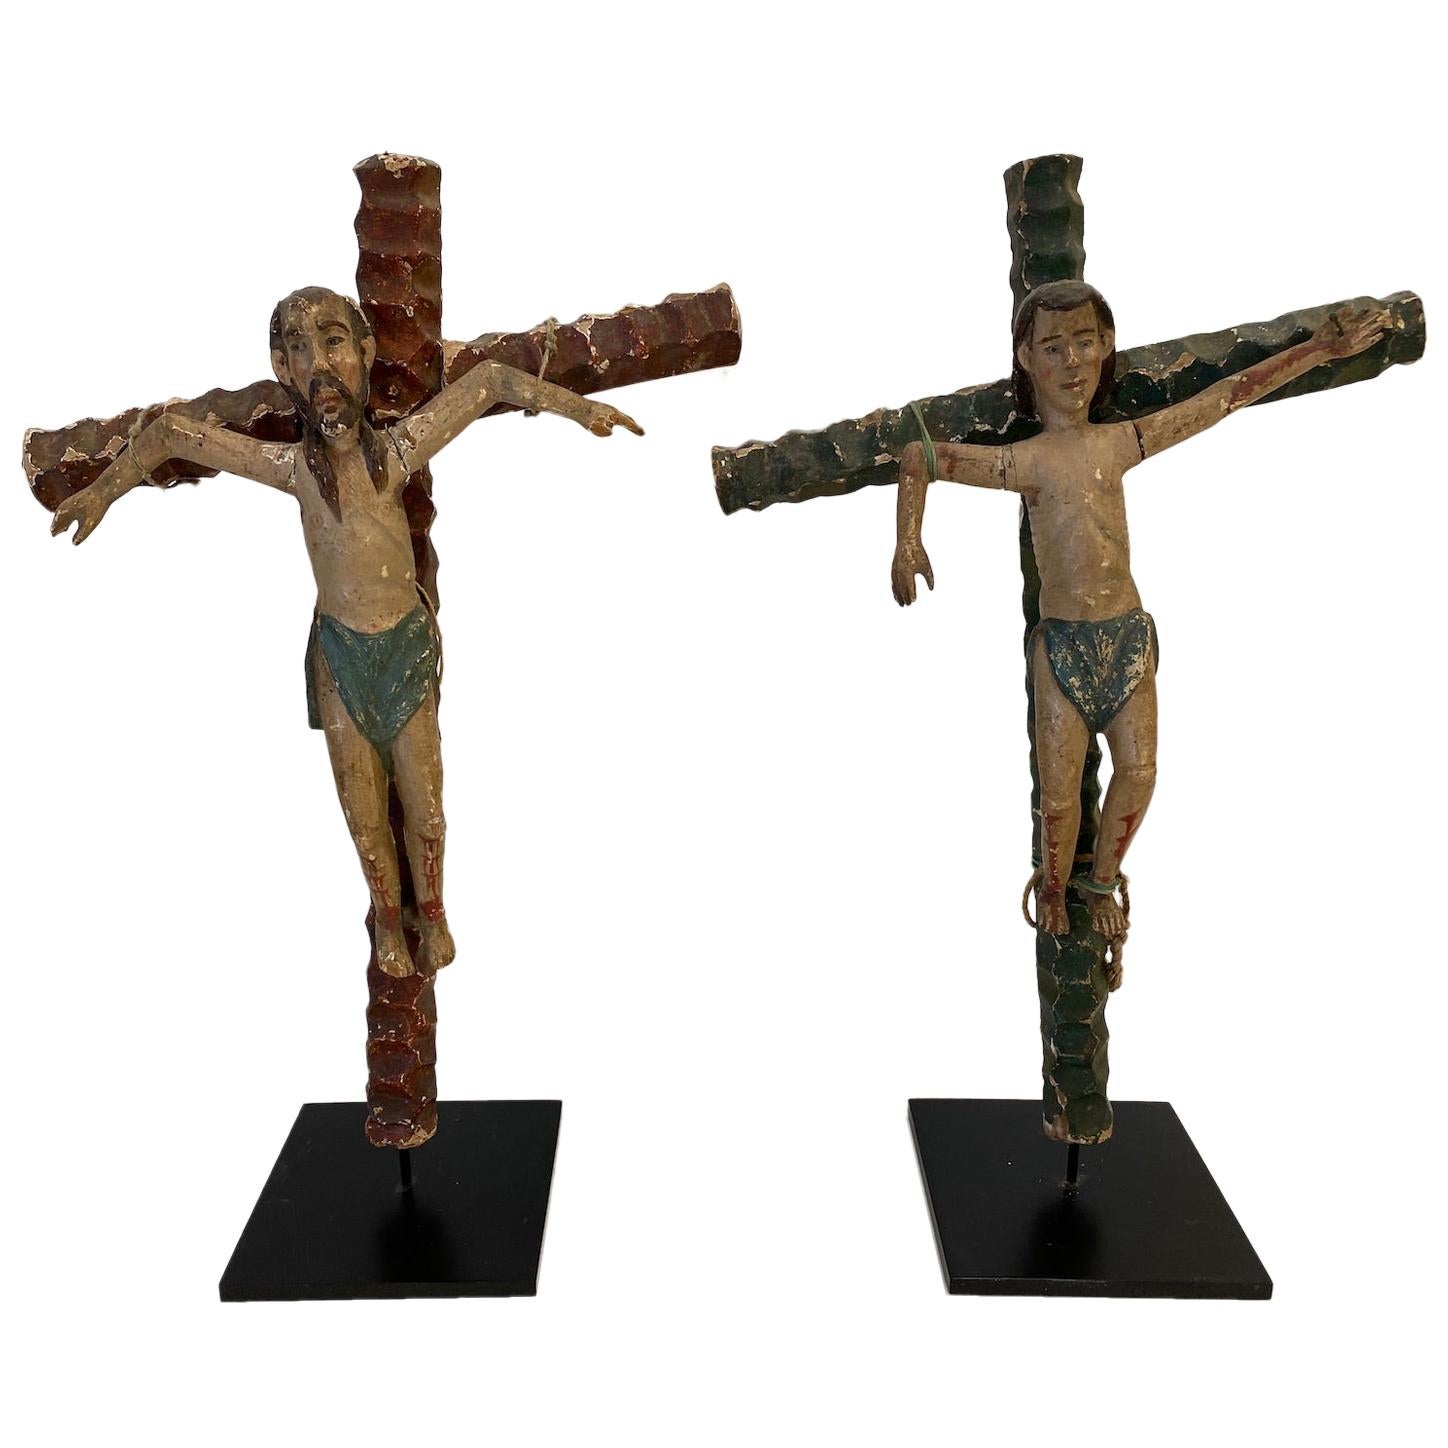 Two 19th Century, Carved and Painted Religious Figures, "The Two Thieves"